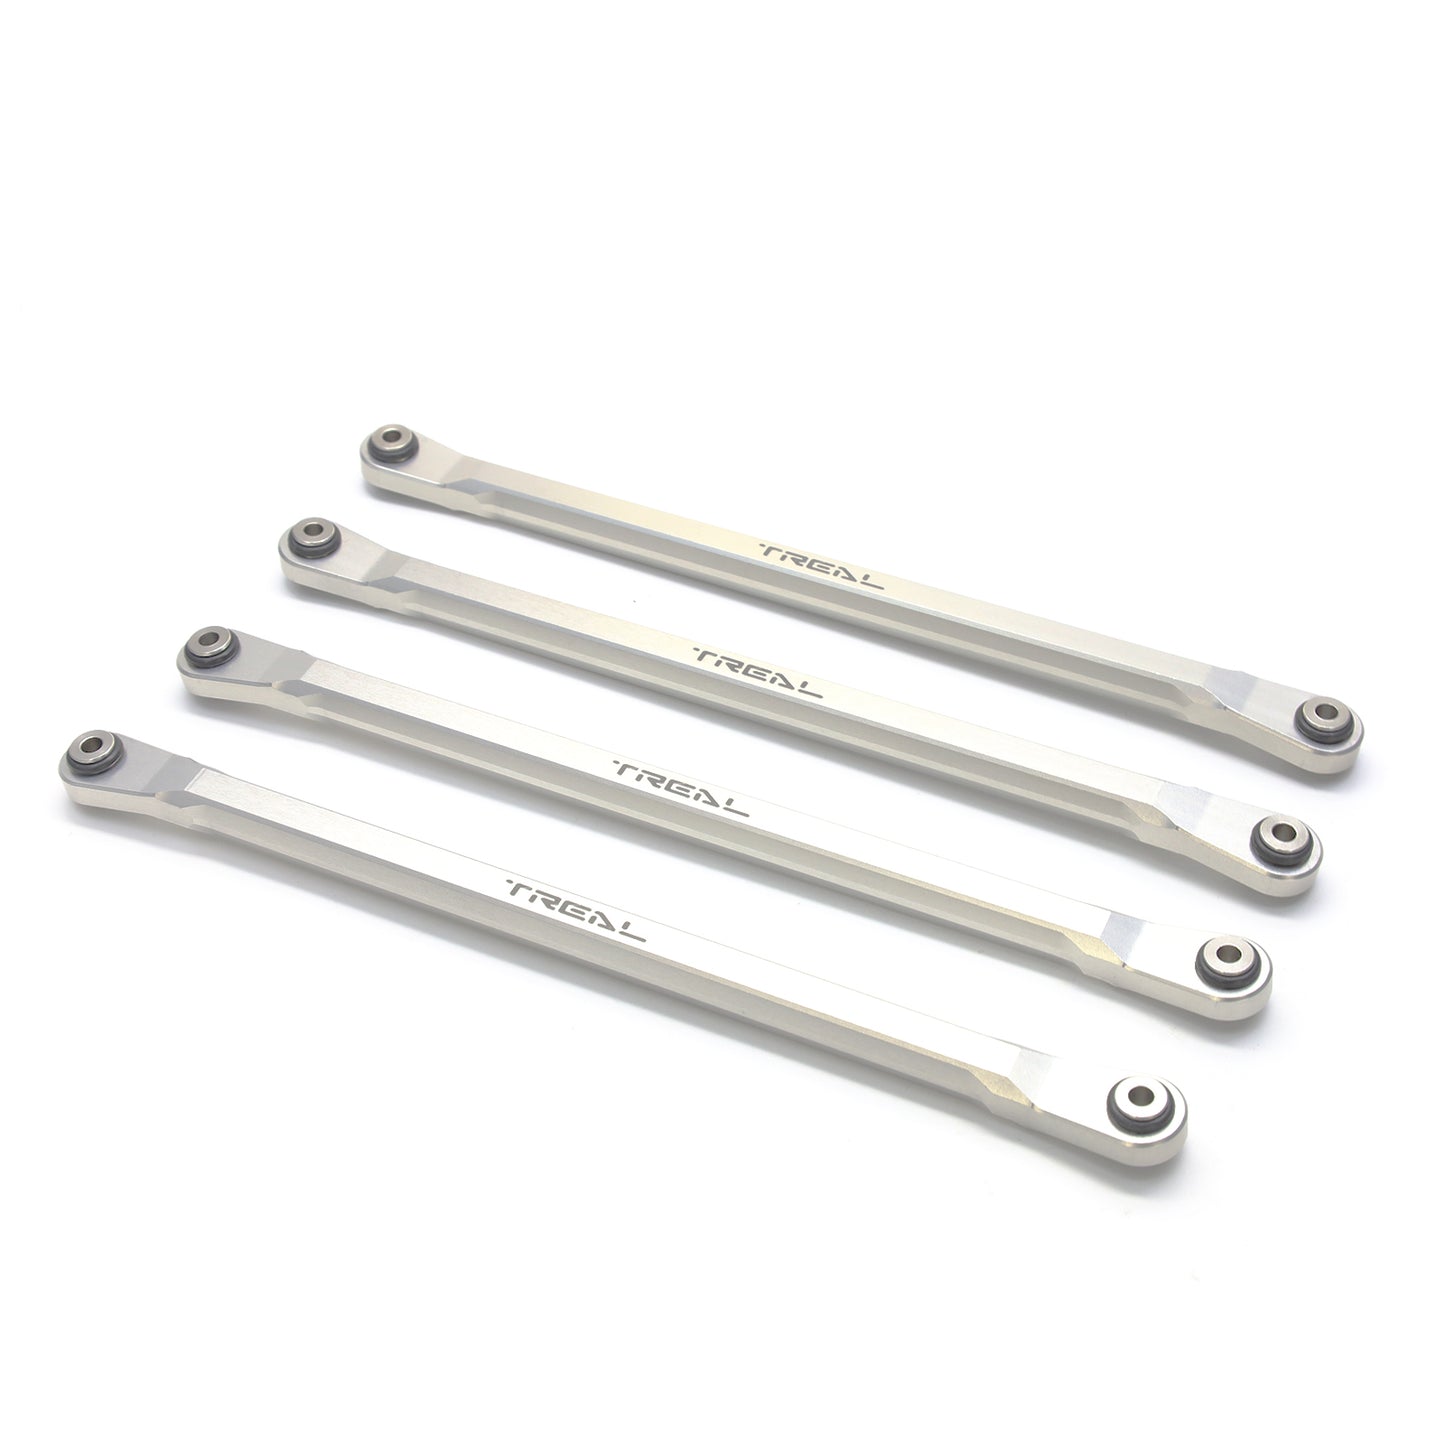 TREAL SCX6 Lower Links Set (4) Aluminum 7075 Rod Links Replacements for Axial SCX6